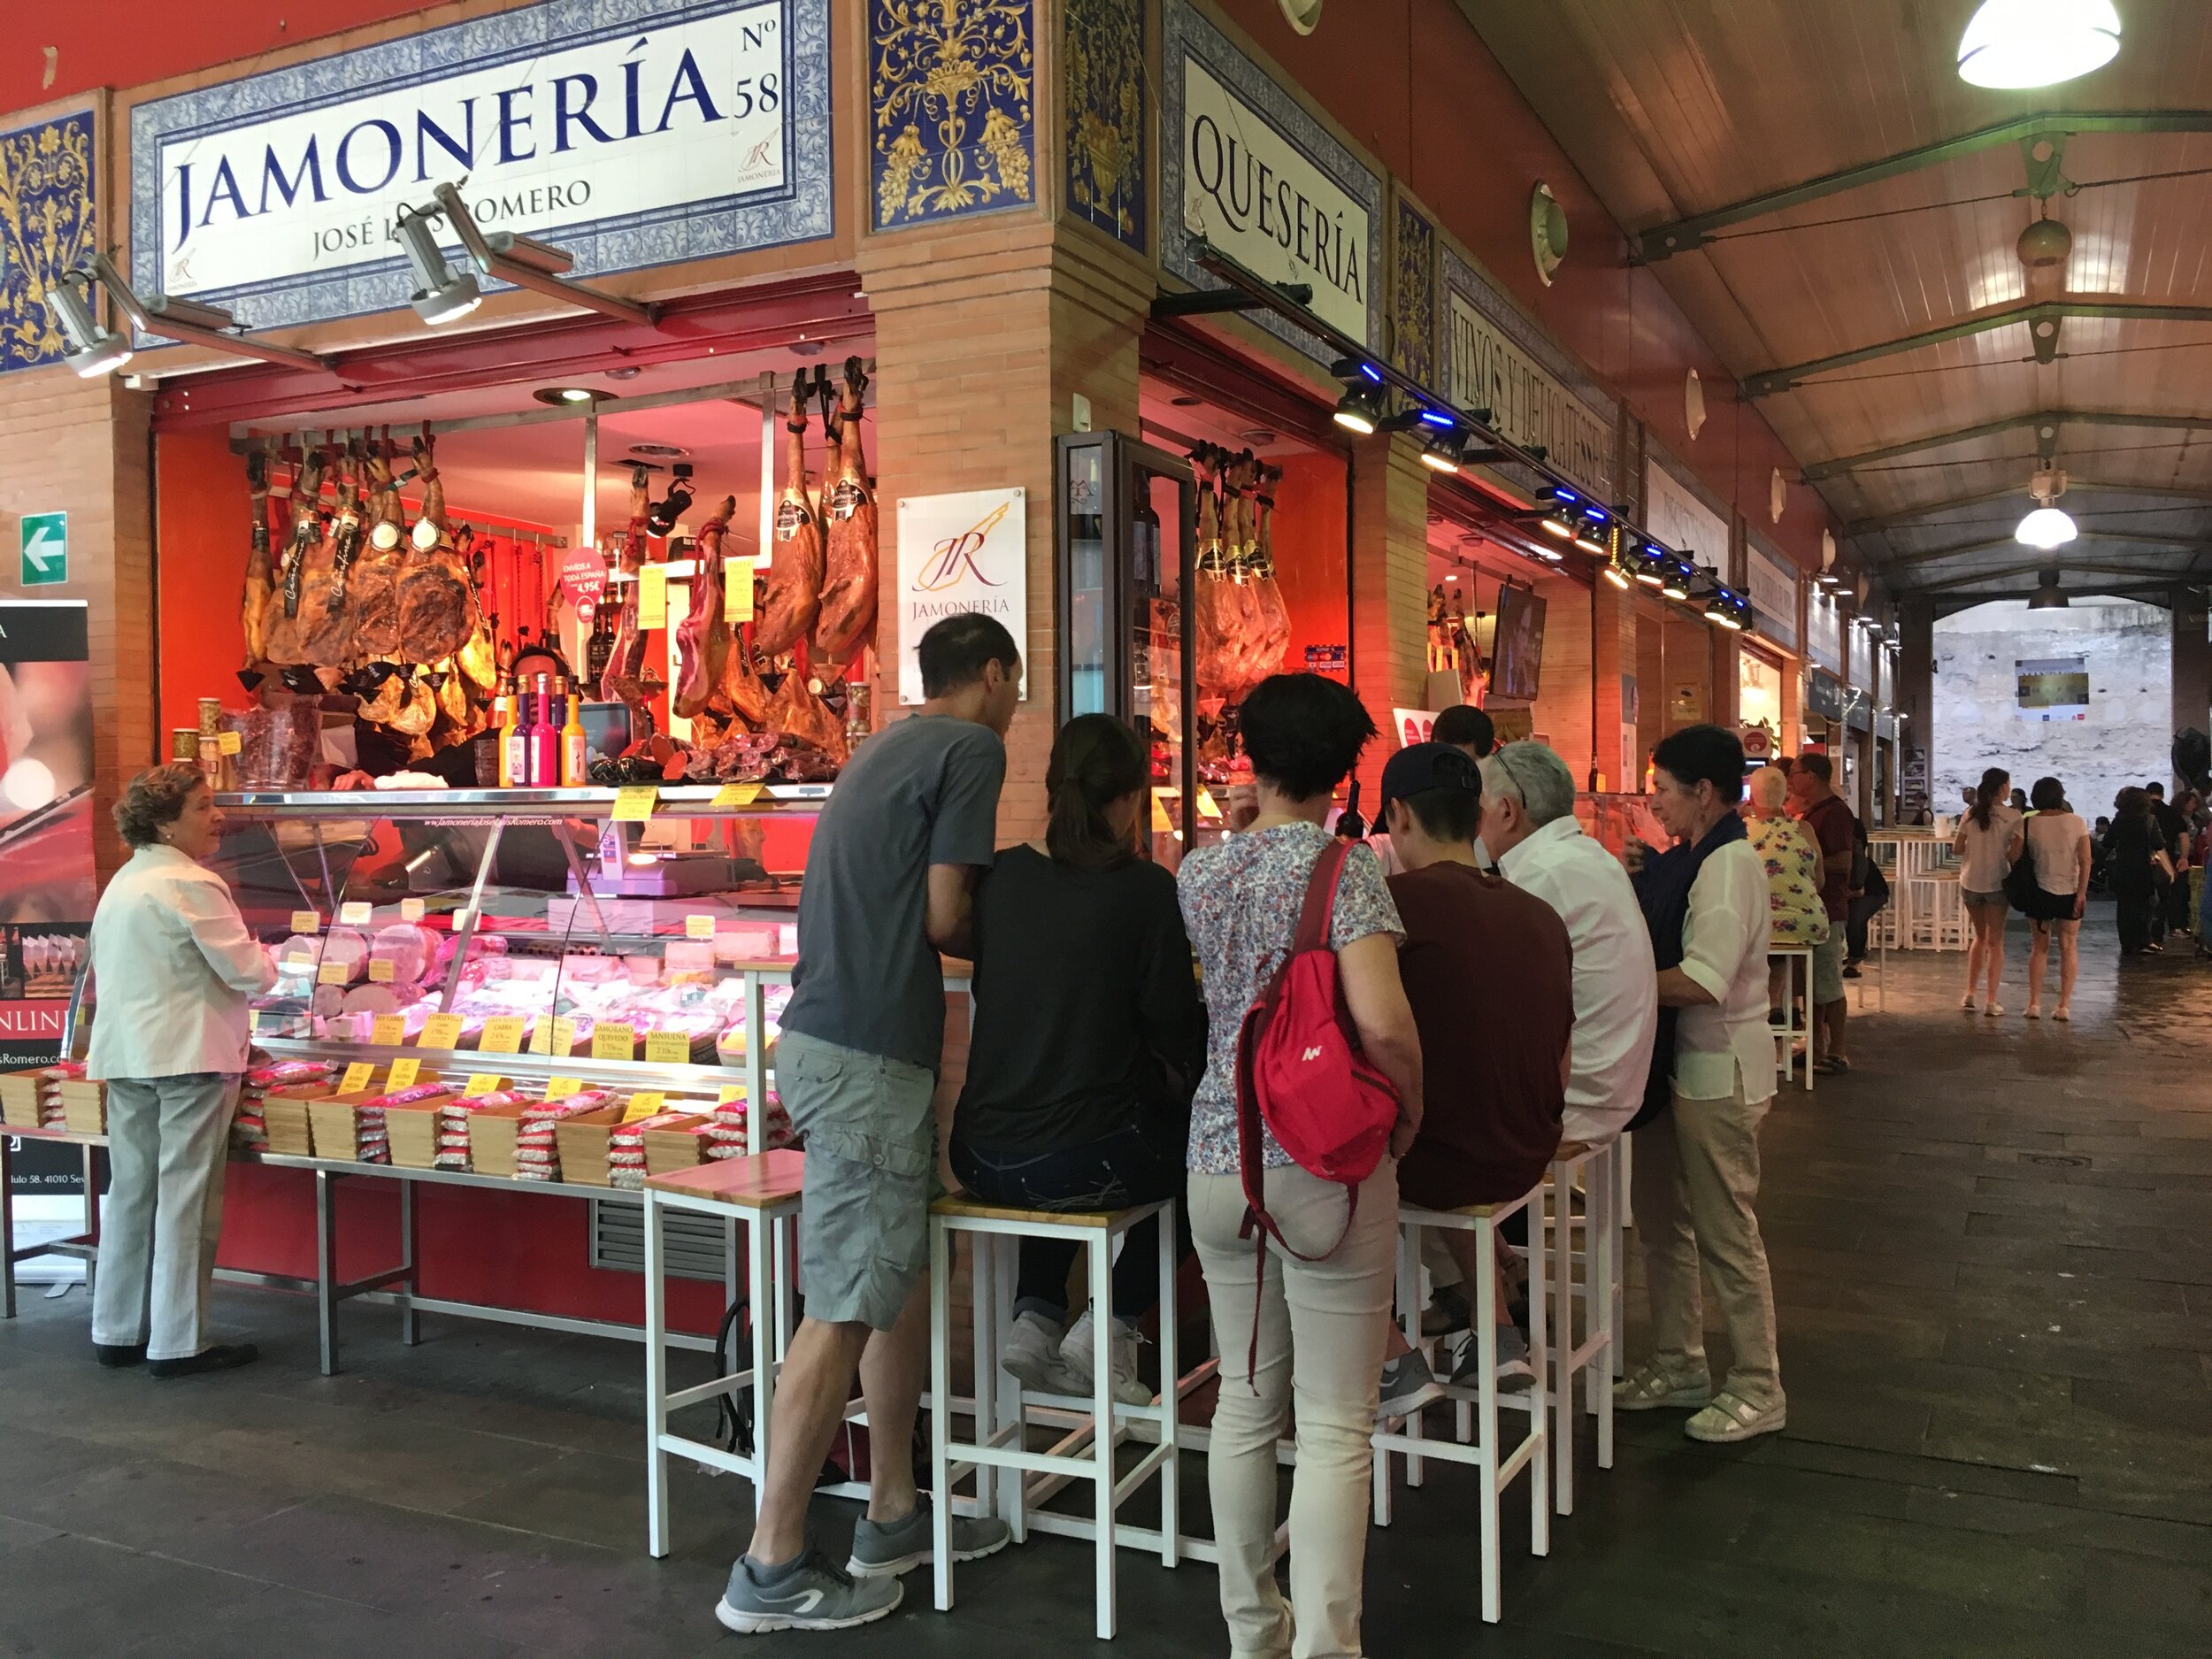  Stop in for tapas at the historic Mercado de San Miguel. This market started over 100 years ago; today it offers a bounty of 21st century Spanish gastronomy, including fresh foods, tapas, takeaway, and gourmet groceries and products of all kinds. Al